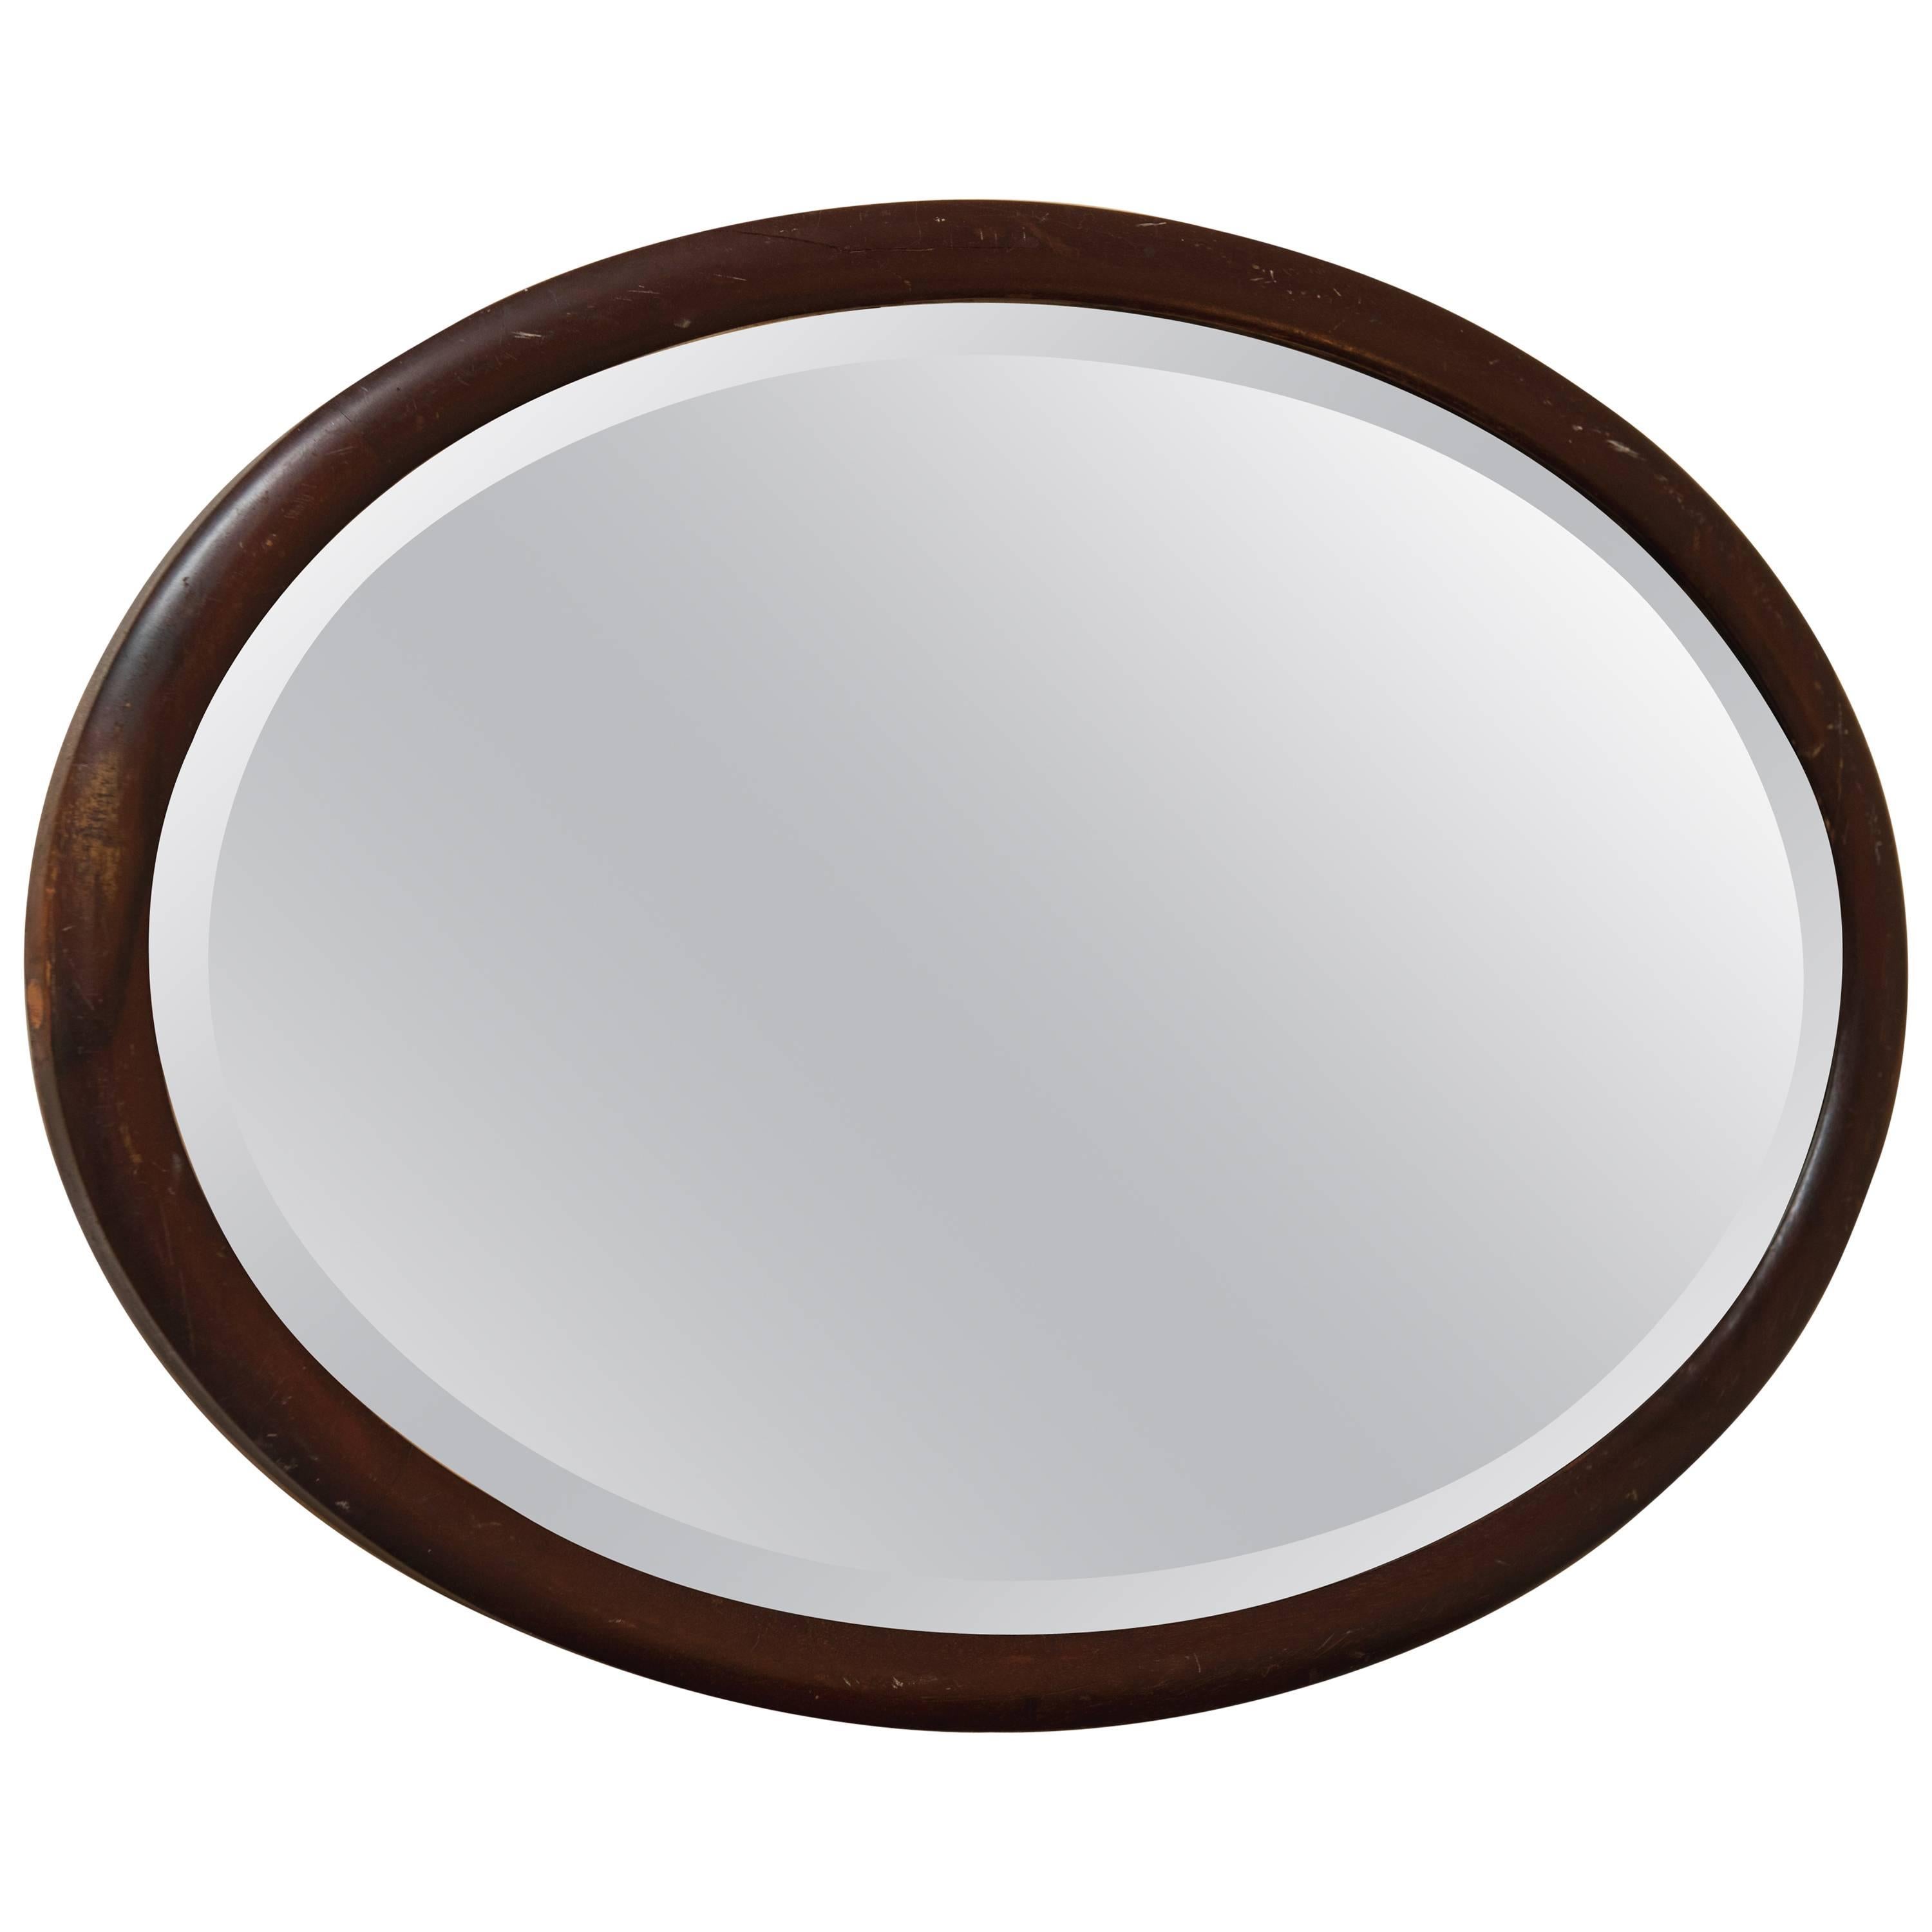 Oval Wood Mirror For Sale